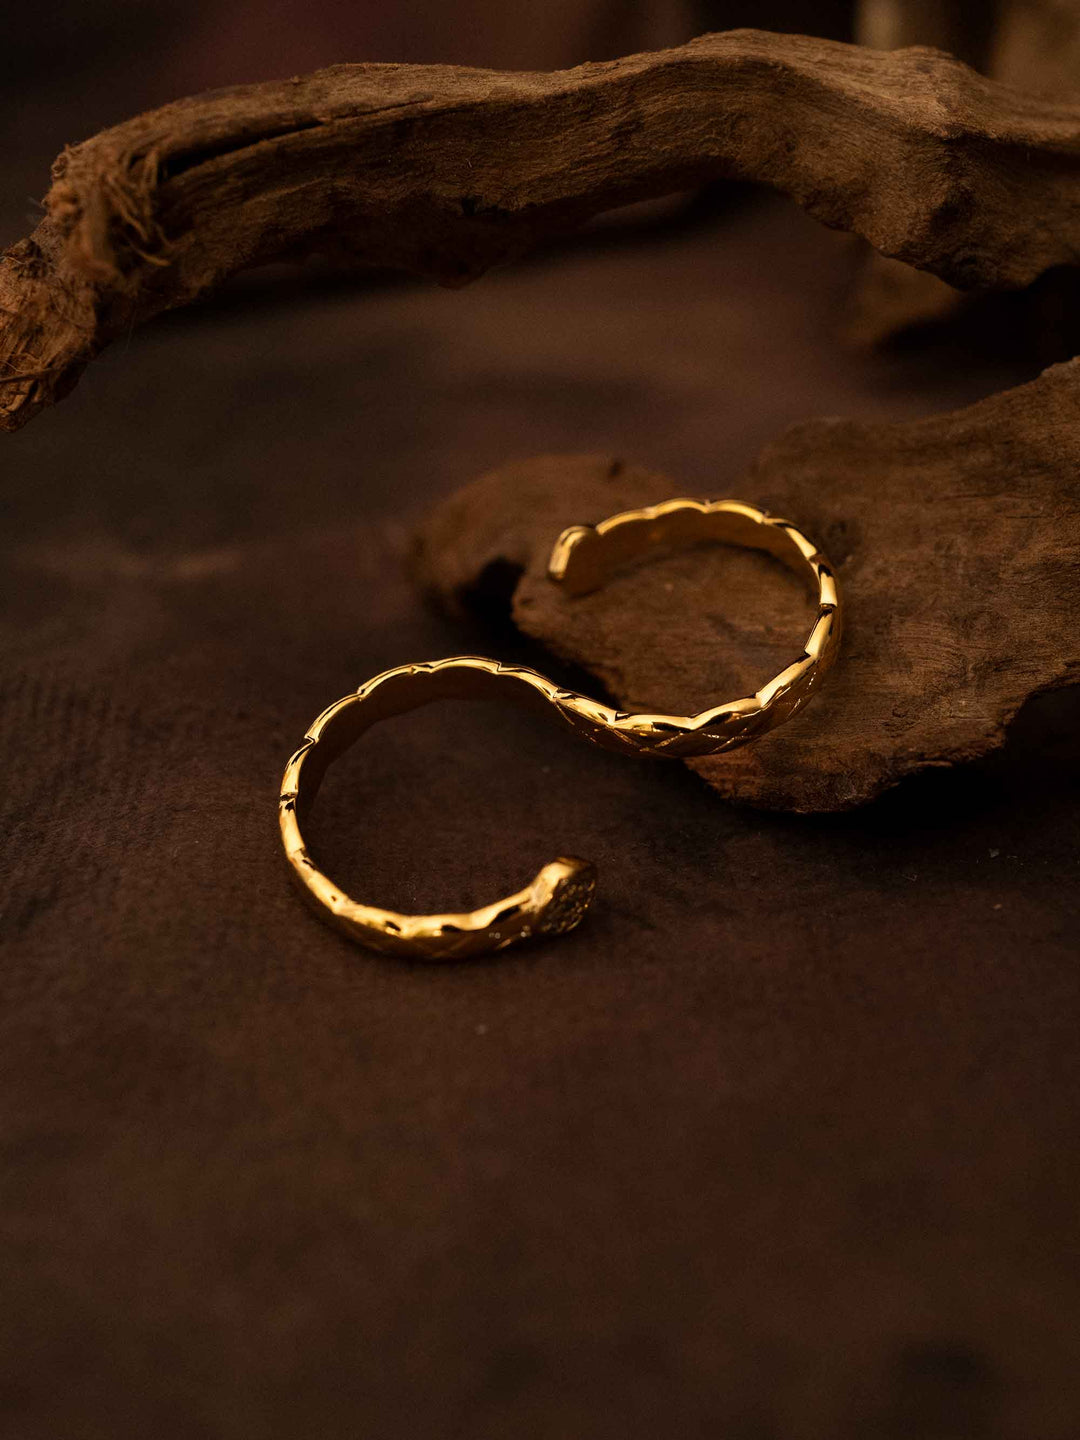 An S-shaped gold ring